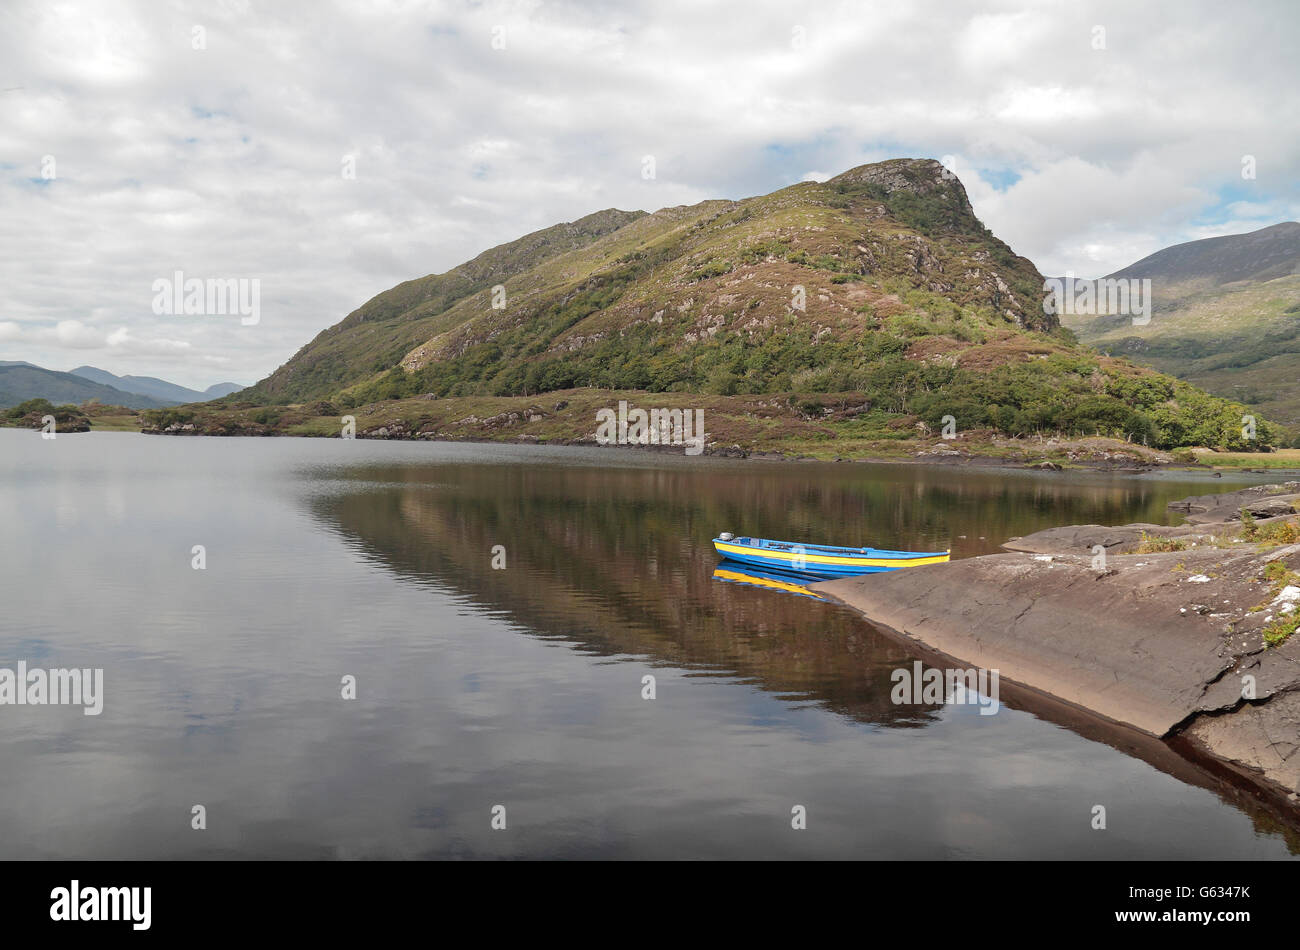 A lone paddle boat in Long Range Lake (opp Eagles Nest), Killarney National Park, Ring of Kerry, Co. Kerry, Ireland. Stock Photo